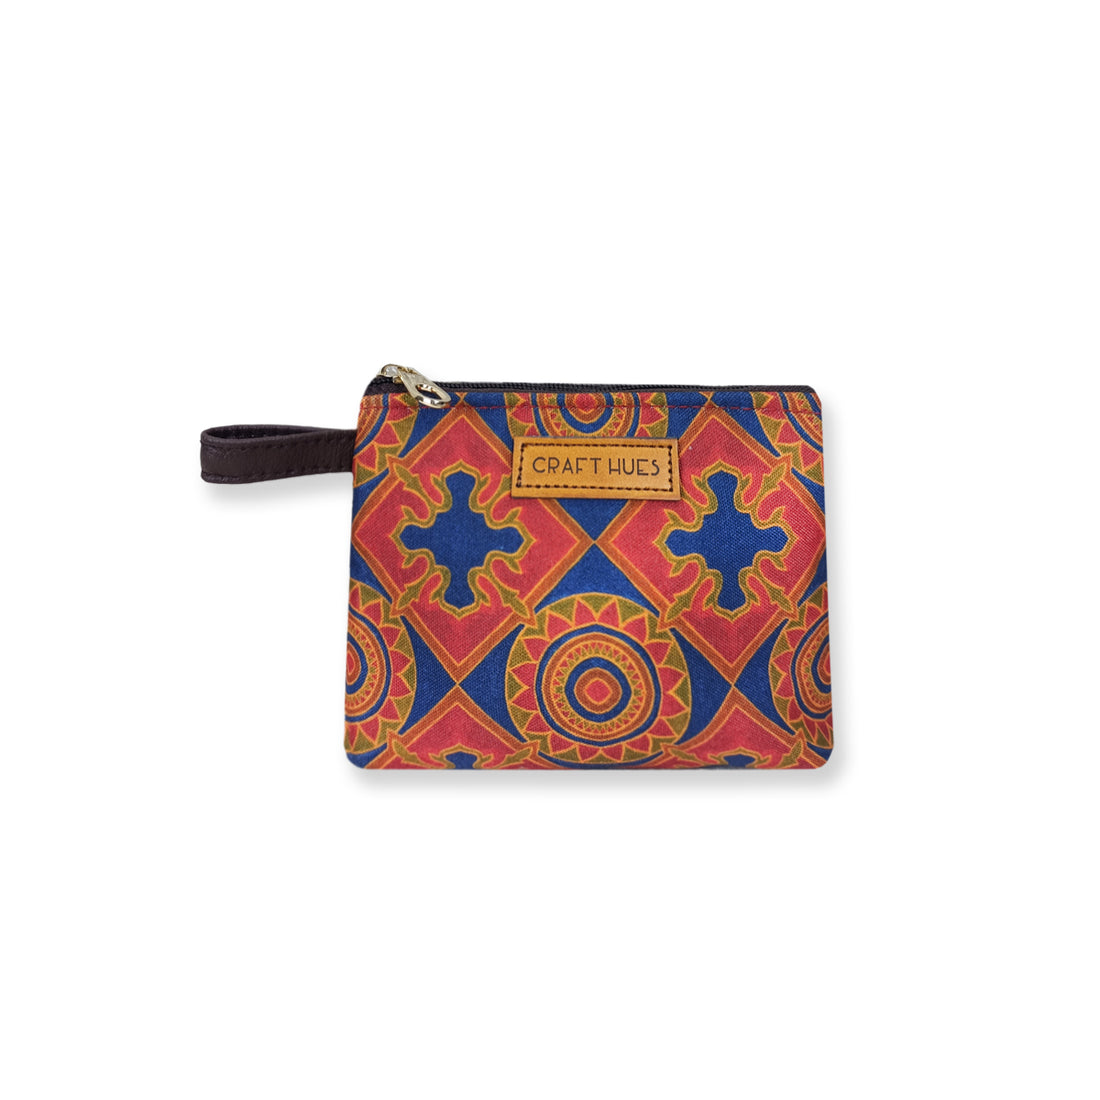 Chakra Tile Sling Pouch Combo